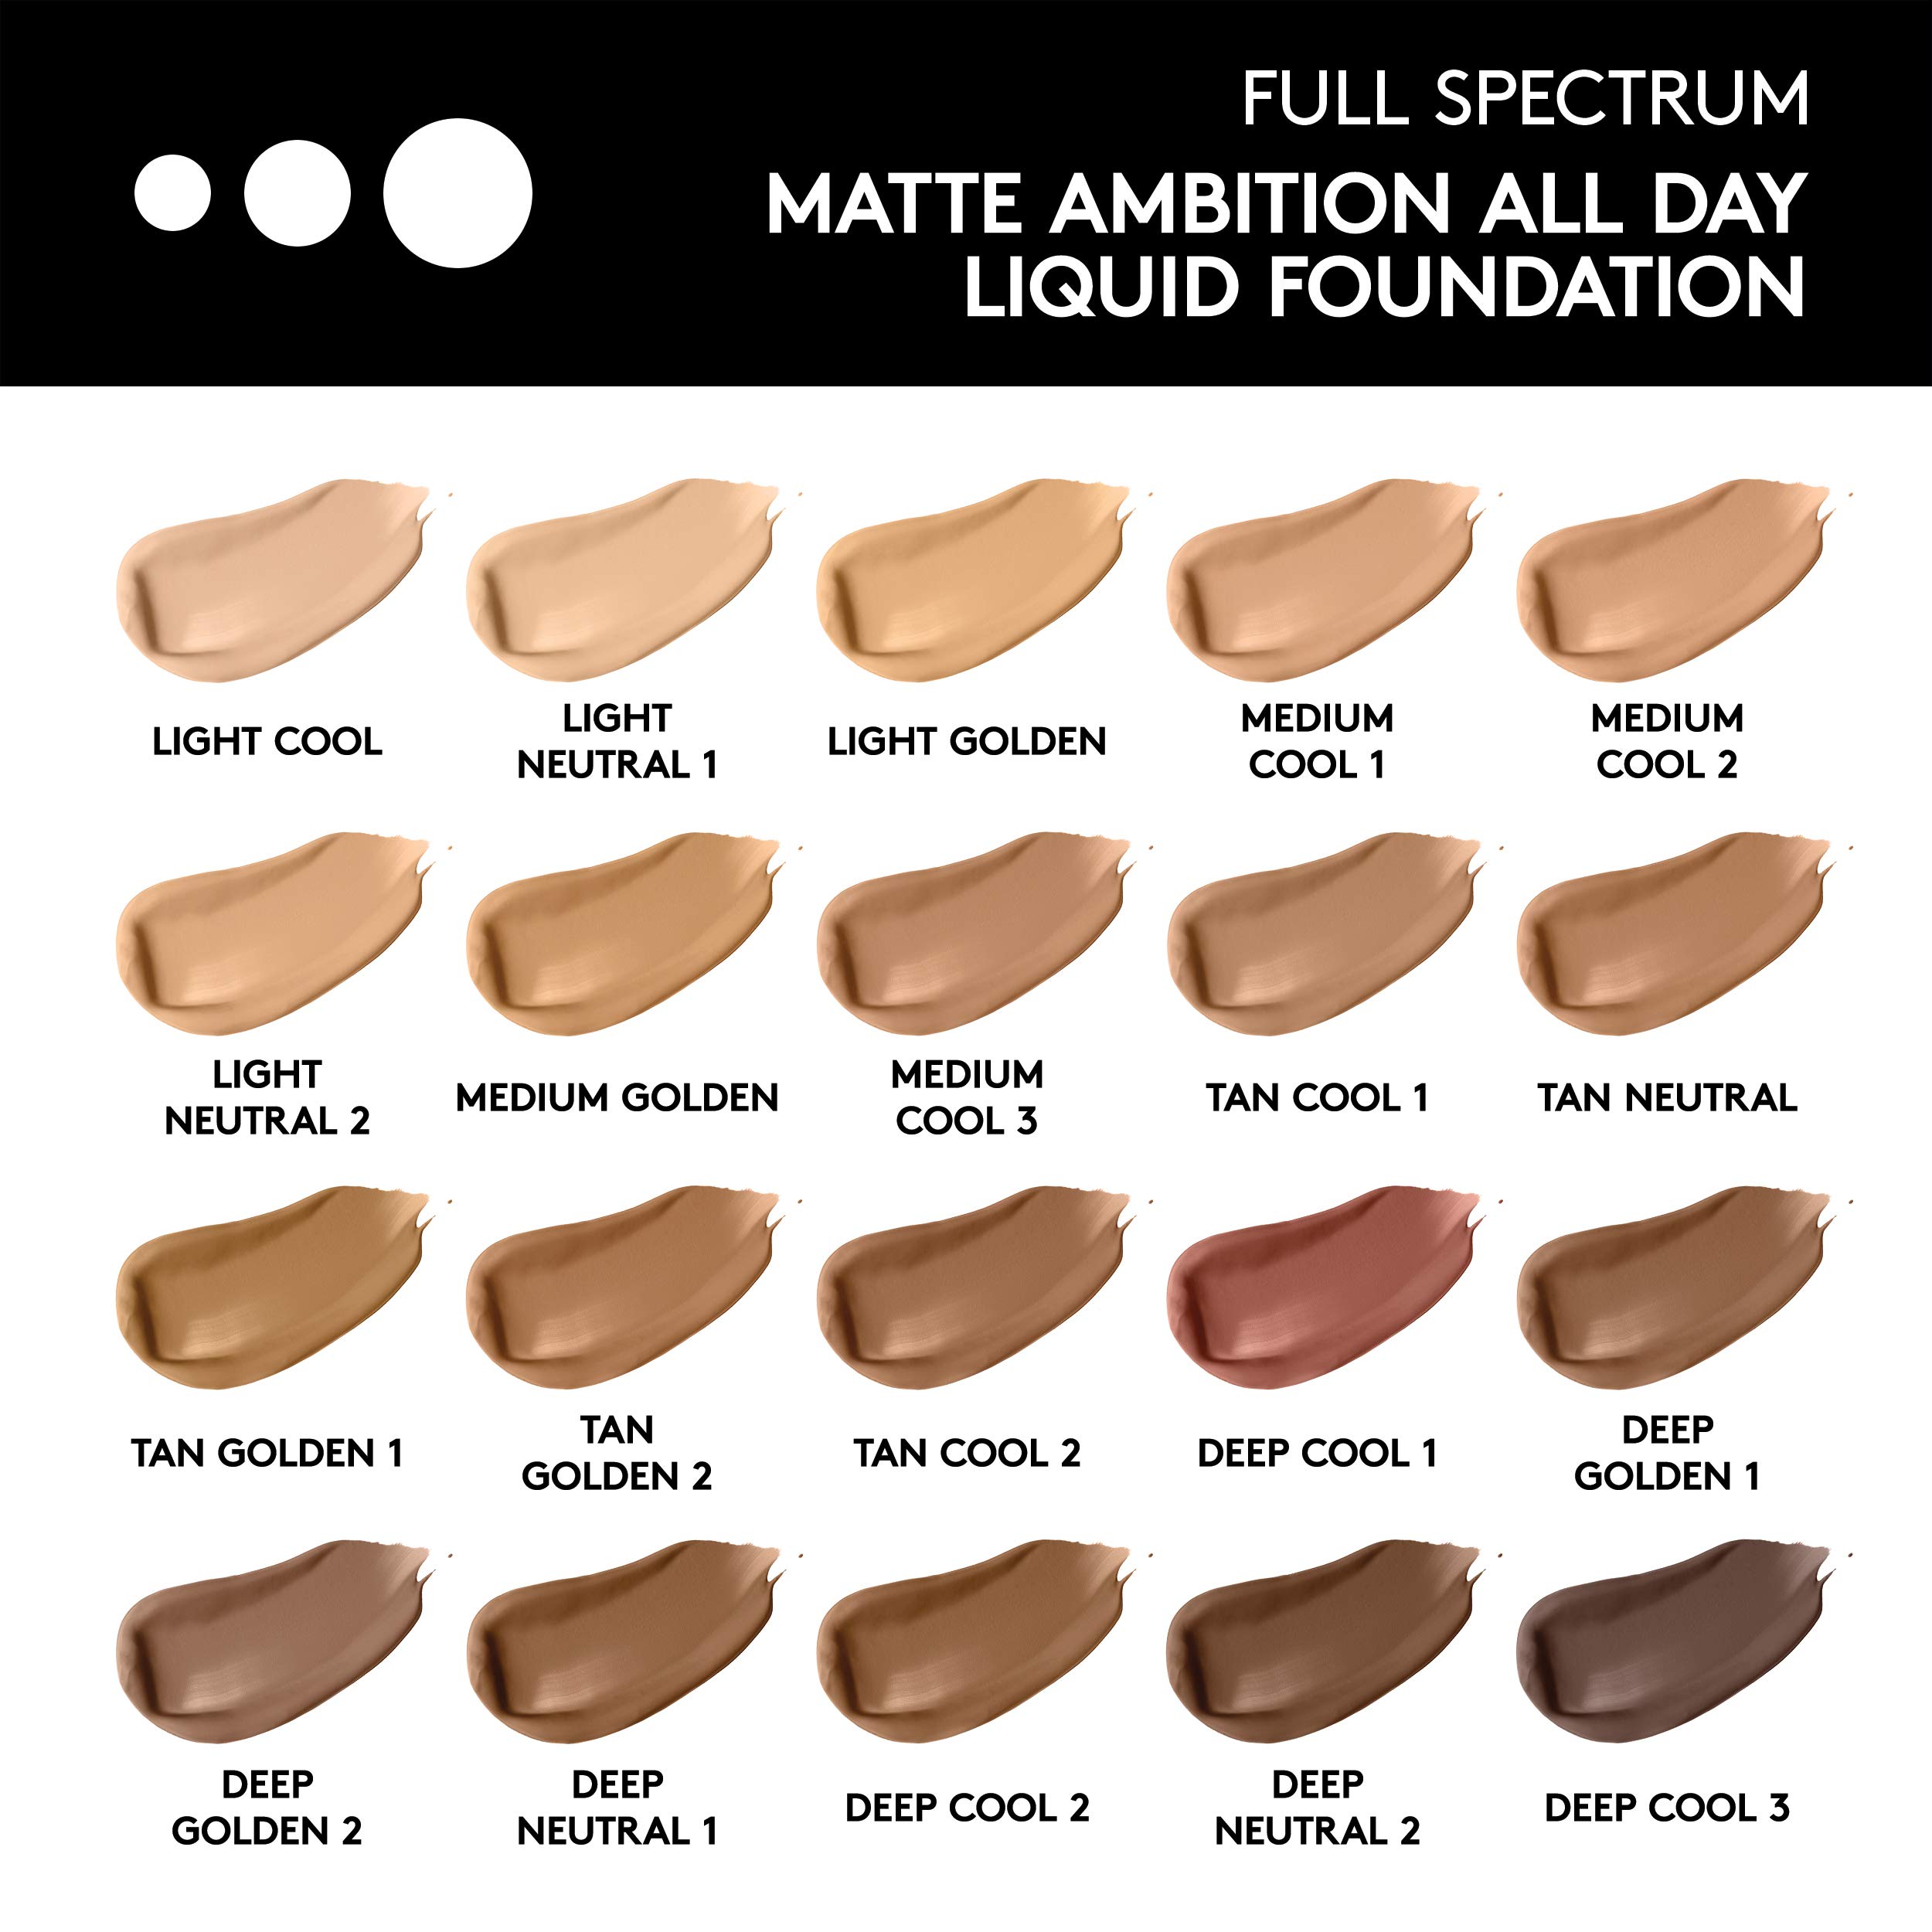 COVERGIRL Matte Ambition, All Day Foundation, Medium Cool 3, 1.01 Ounce